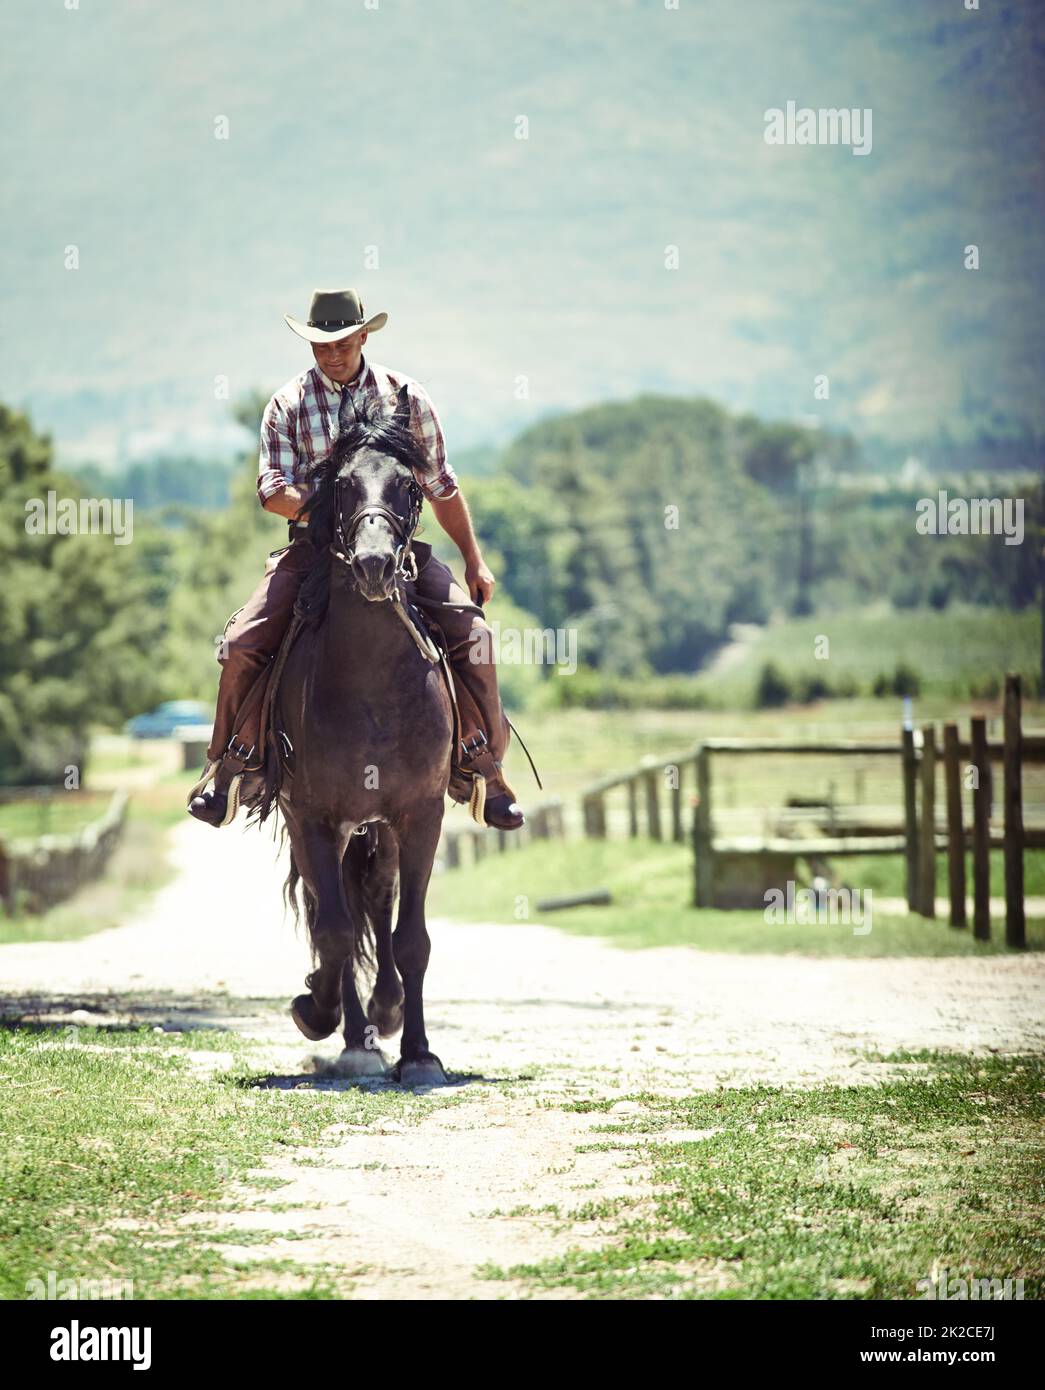 Yeeha. Shot of a cowboy riding his horse on a country lane. Stock Photo